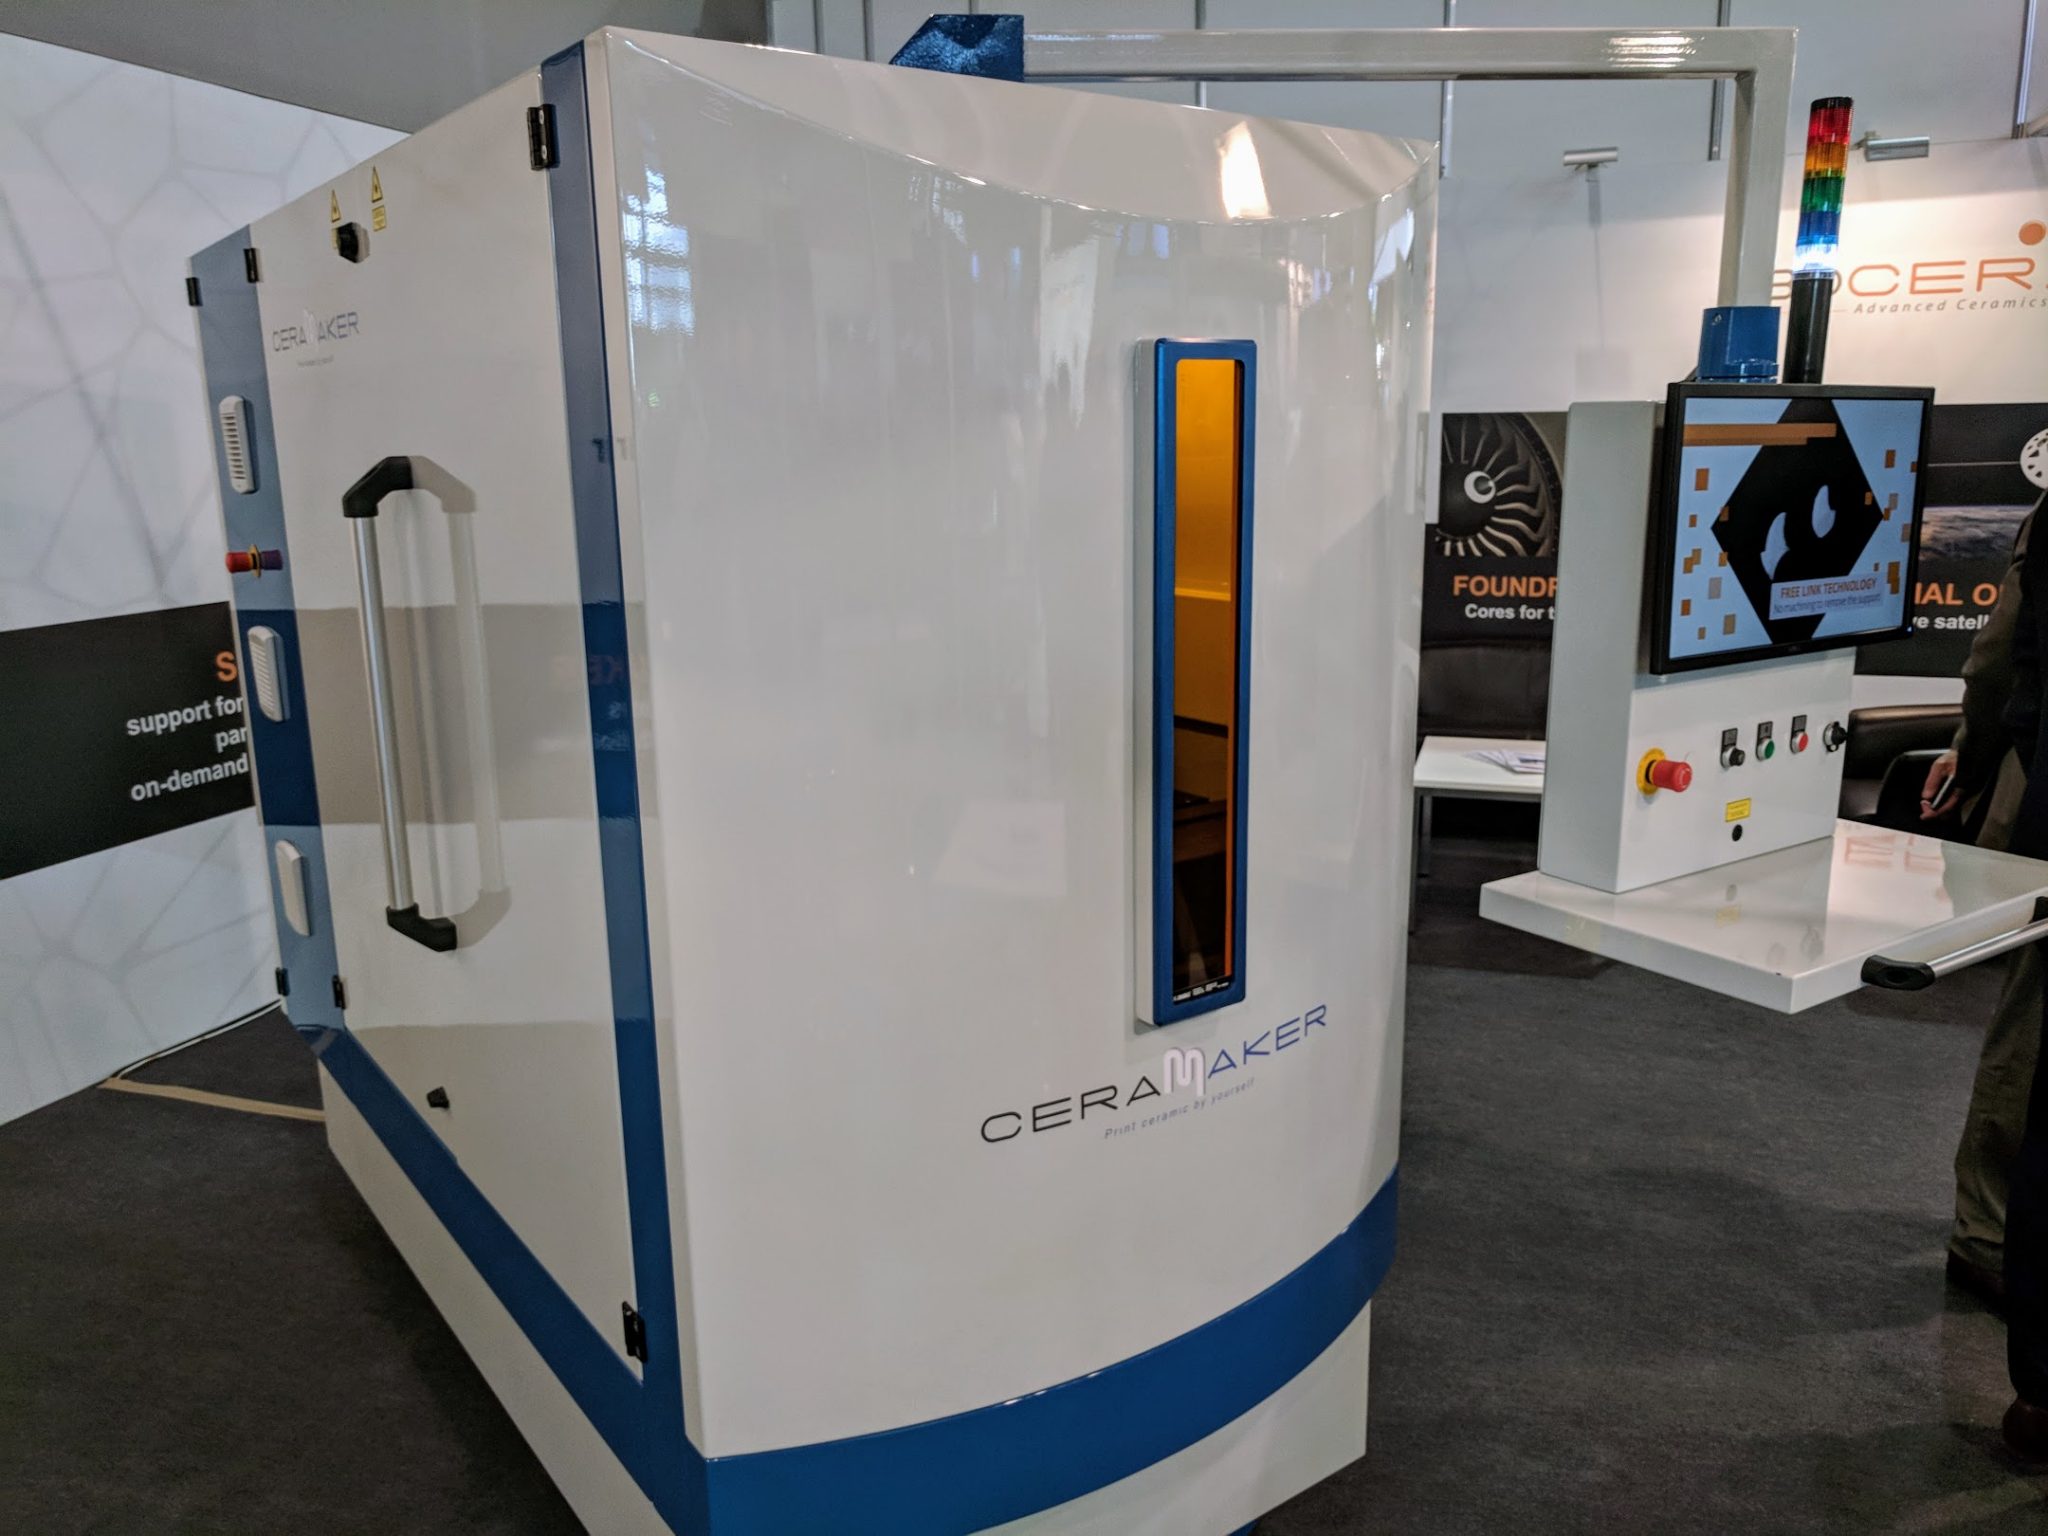 The Ceramaker 3D printer from 3DCeram. Photo by Michael Petch.